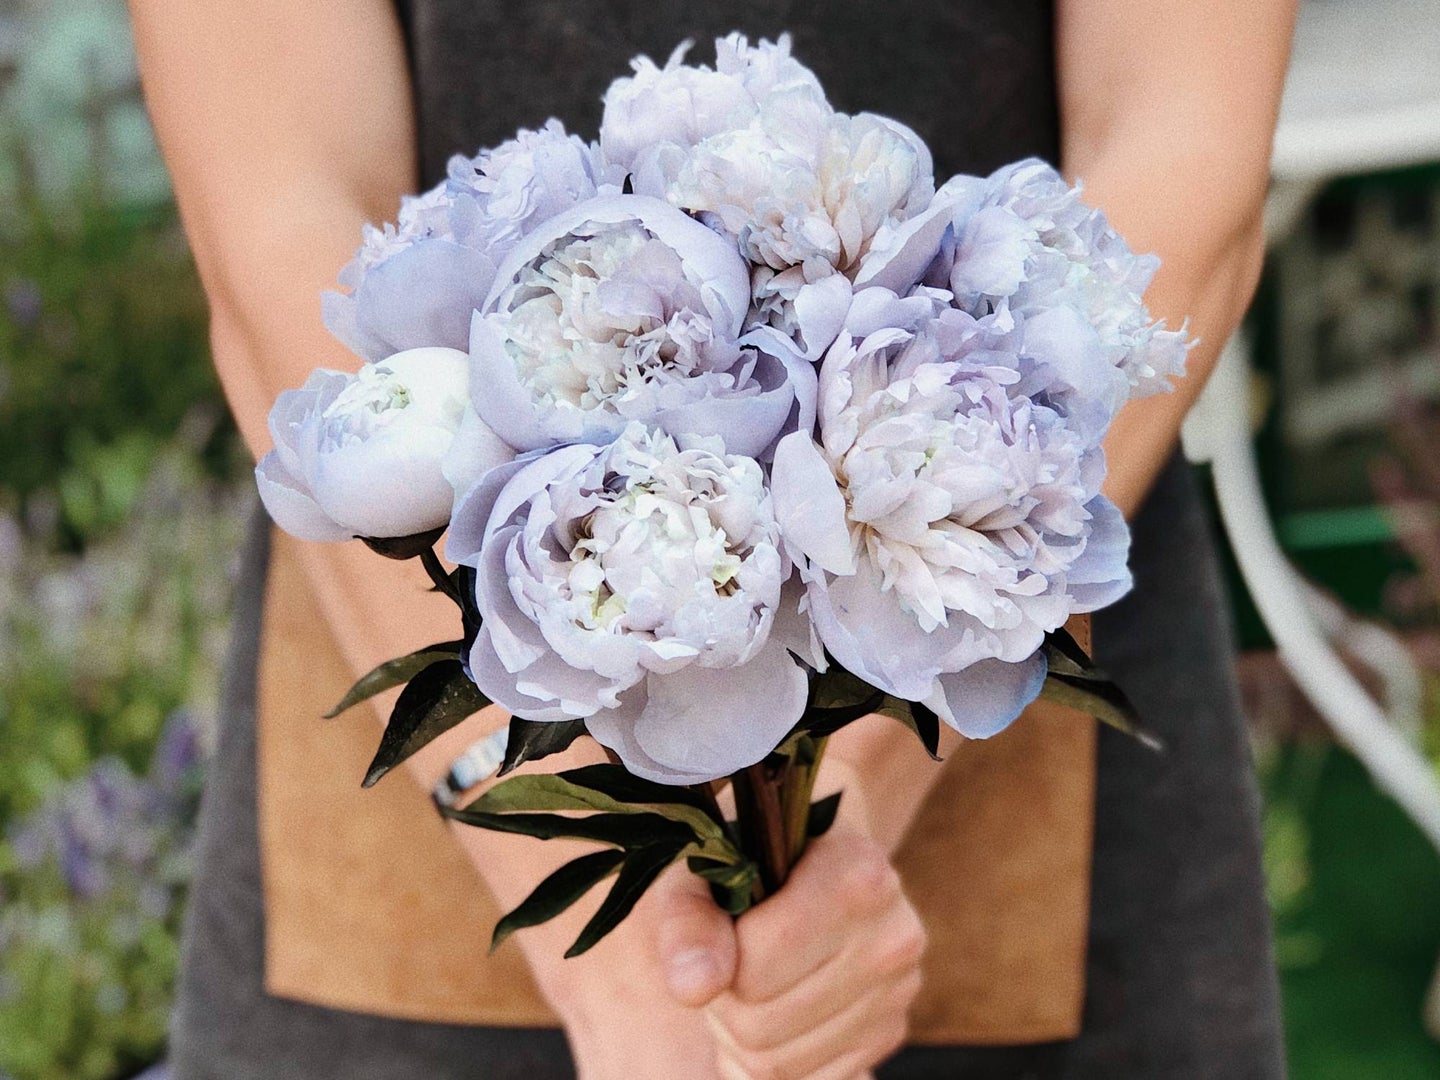 person holding bouquet of peonies